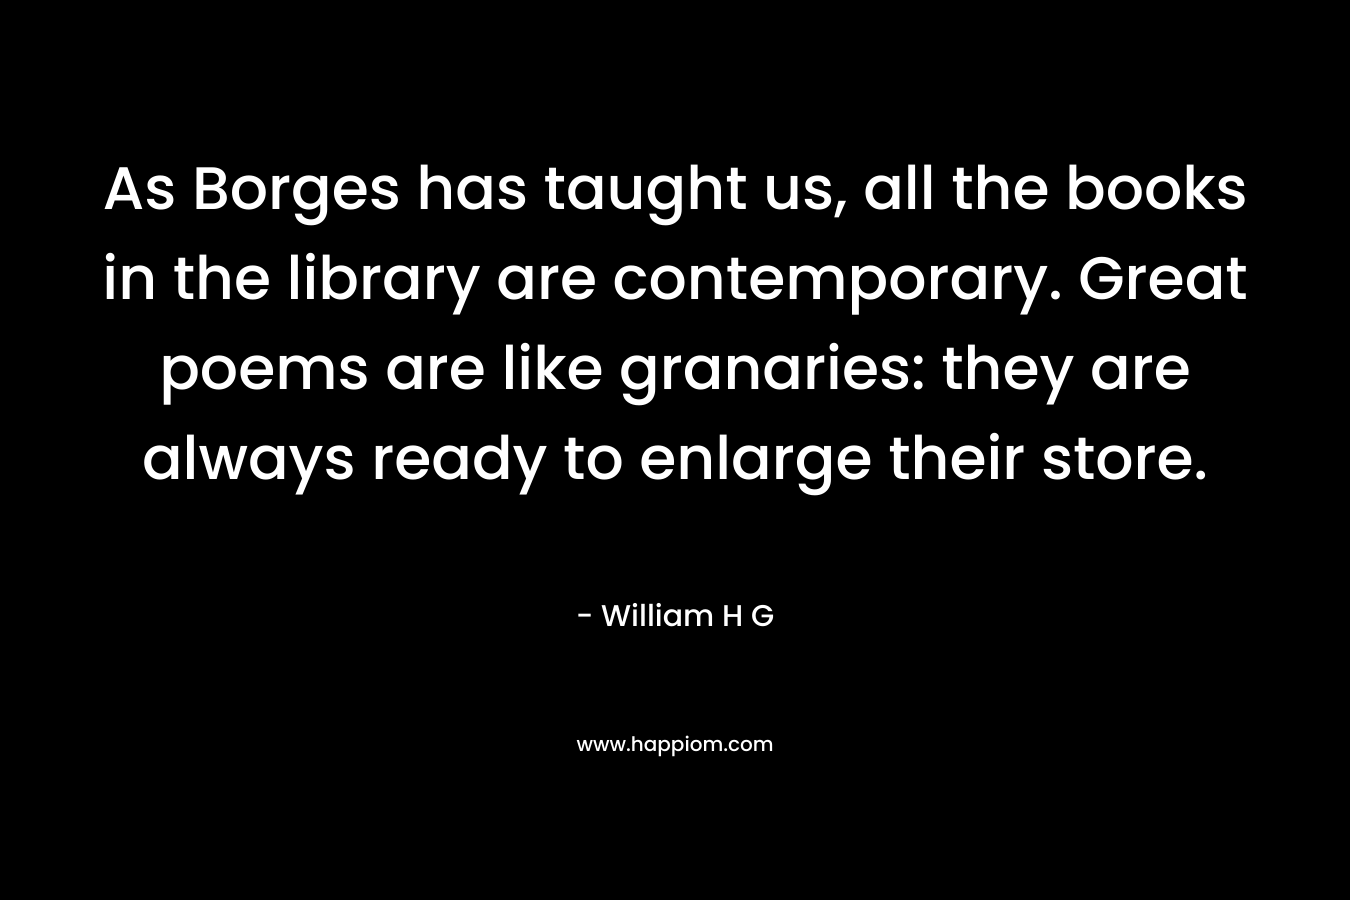 As Borges has taught us, all the books in the library are contemporary. Great poems are like granaries: they are always ready to enlarge their store.